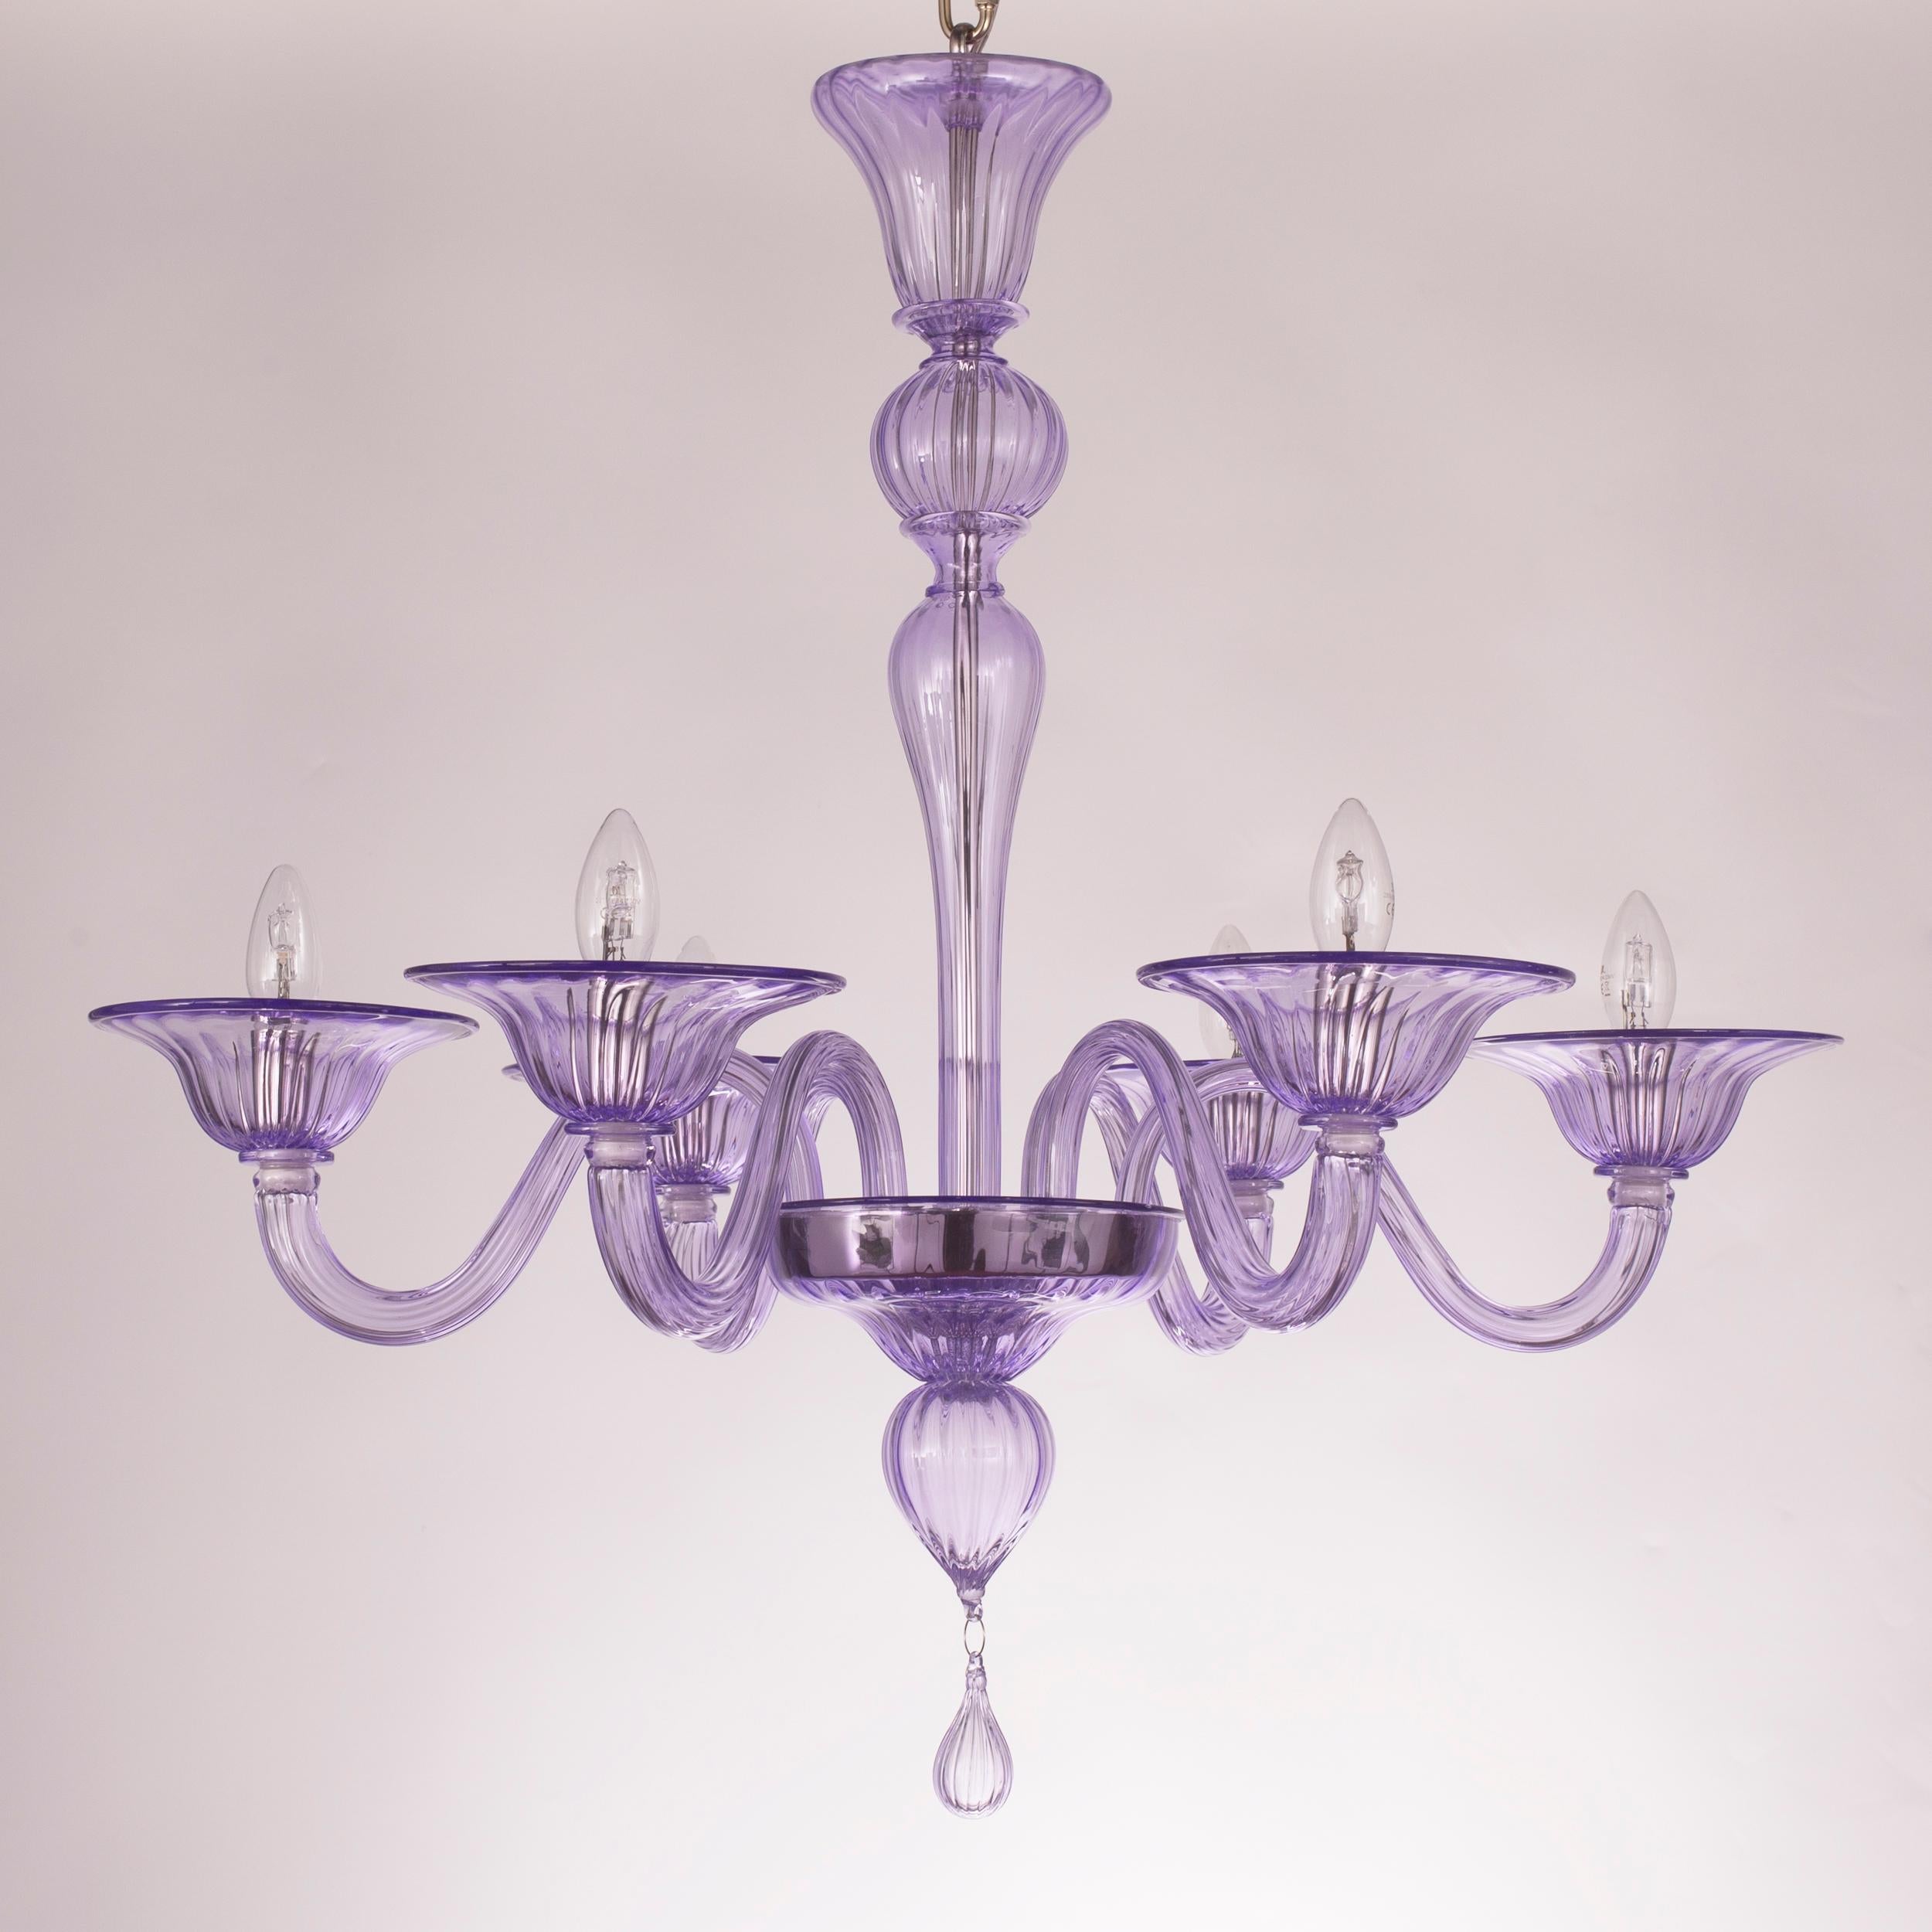 Other Simplicissimus Chandelier, 6 Arms lilac Murano Glass by Multiforme For Sale